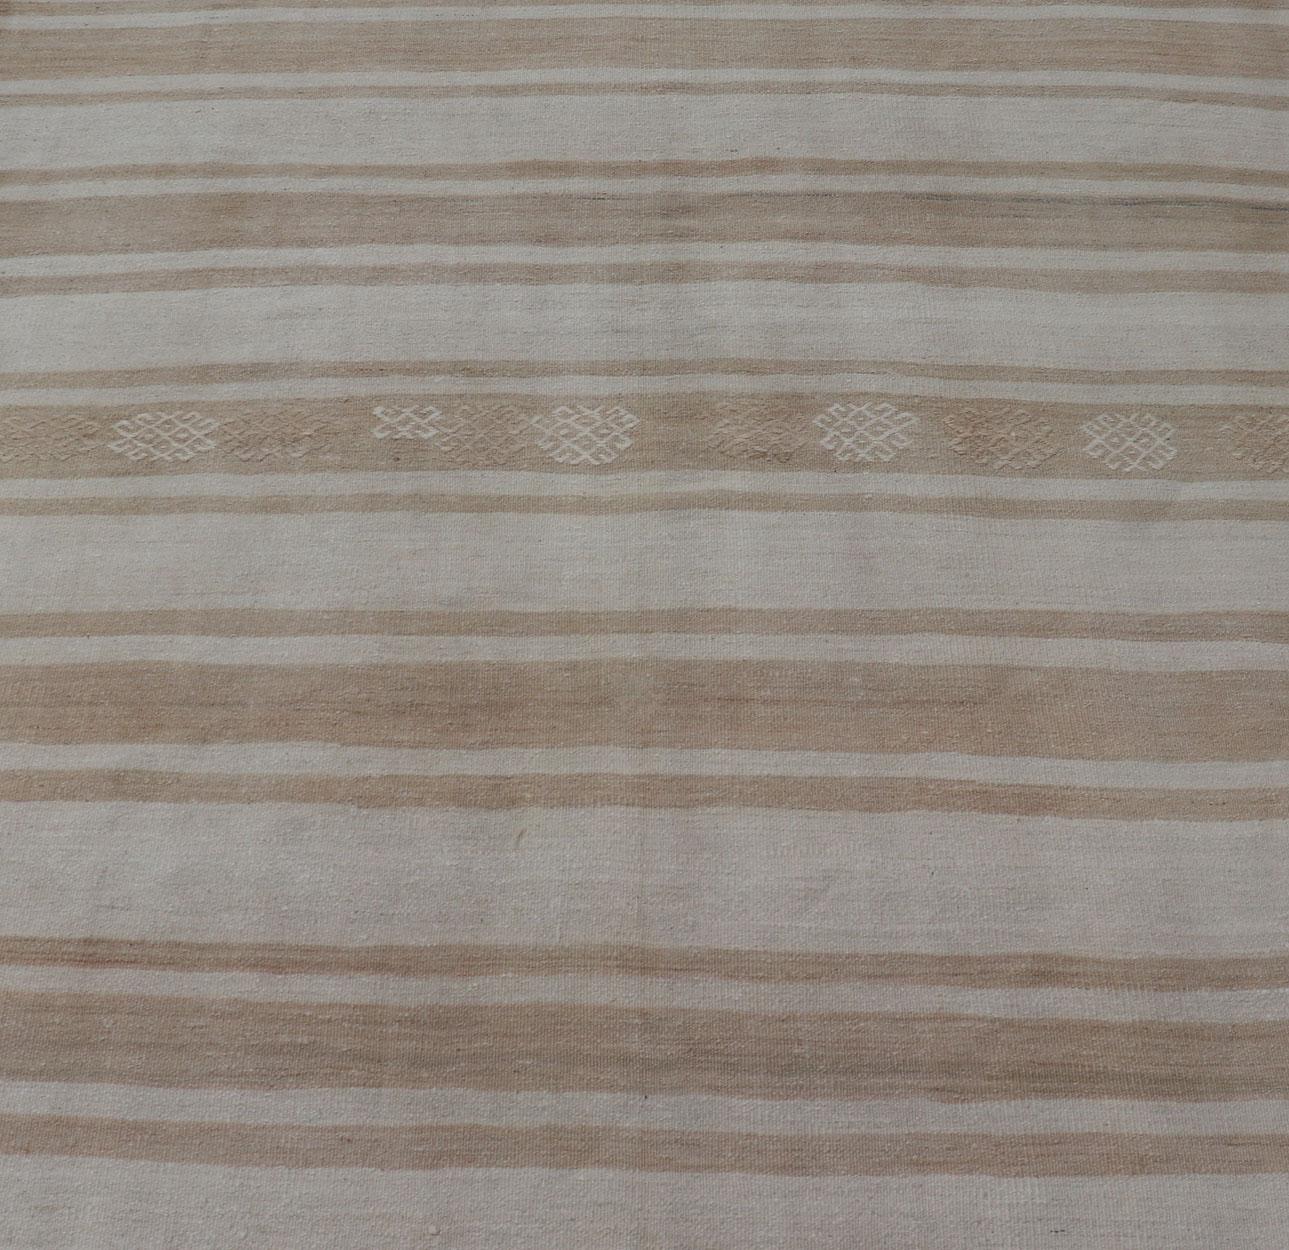 20th Century Square Flat-Weave Kilim Vintage Rug from Turkey with Horizontal Stripes in Taupe For Sale